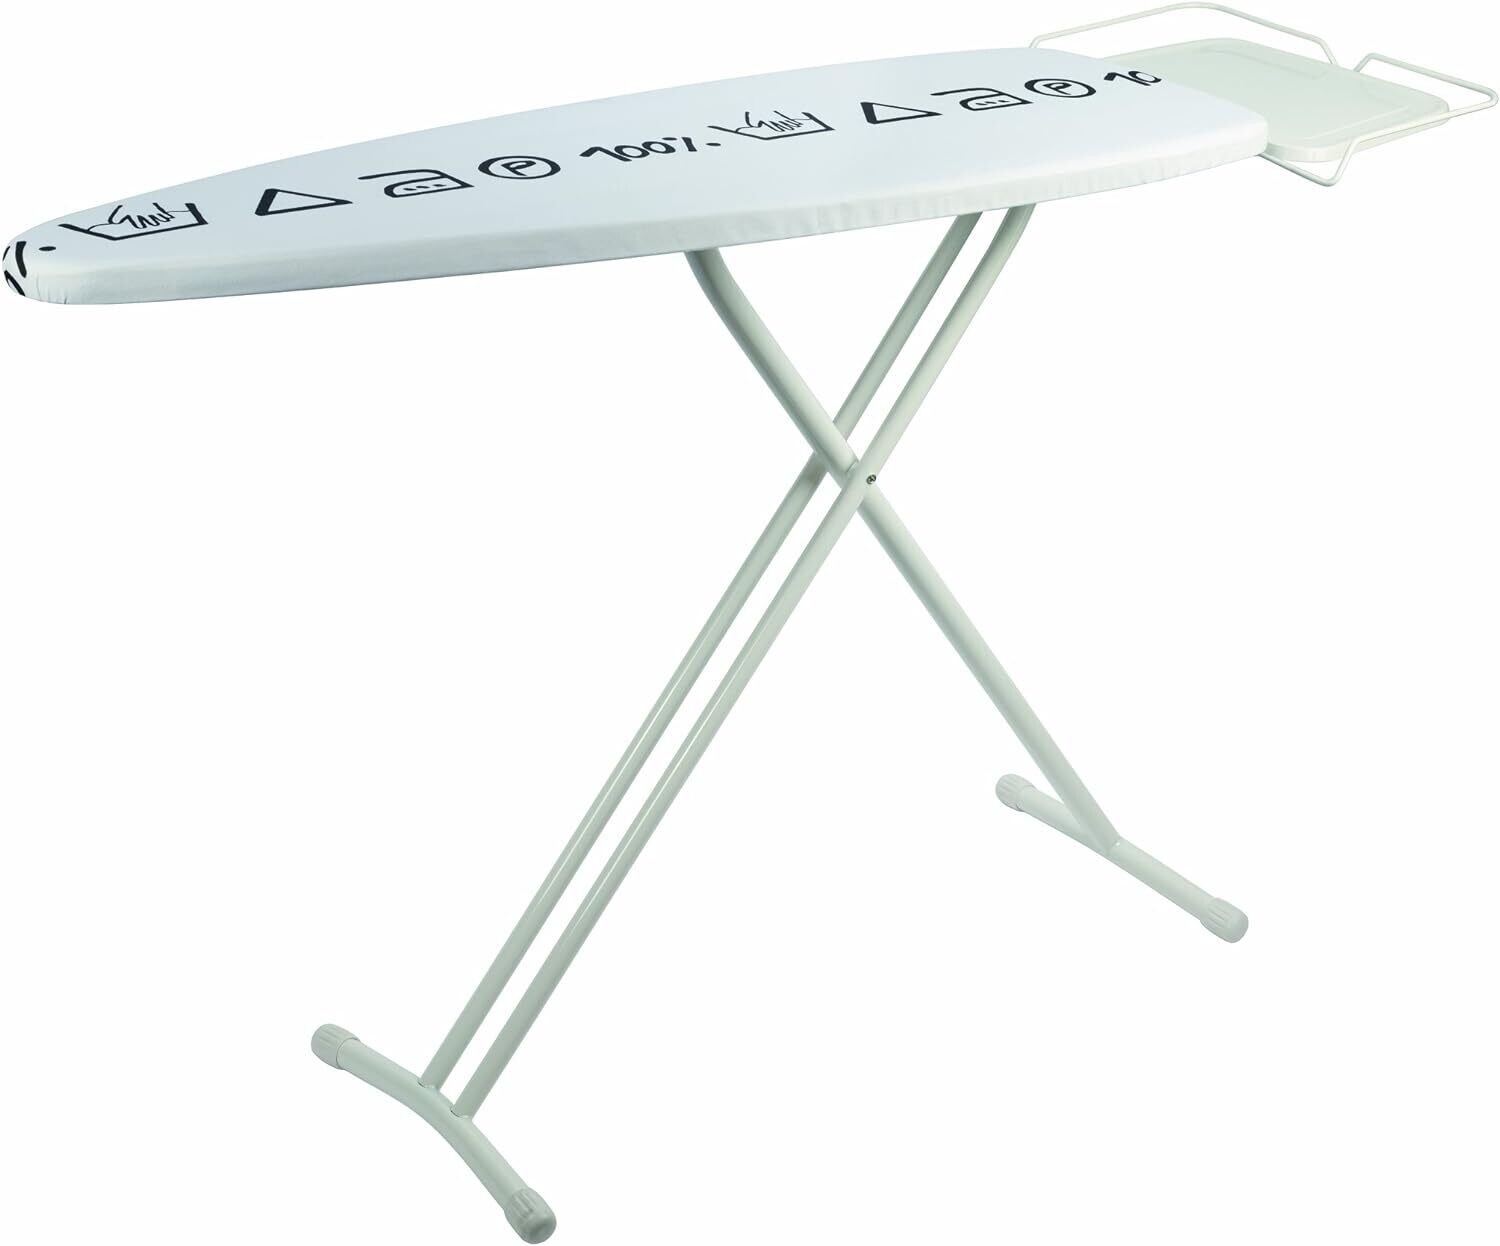 Tefal Ironing Board: TI1200 - High-Quality, Adjustable, with Steam Ironing Station Shelf